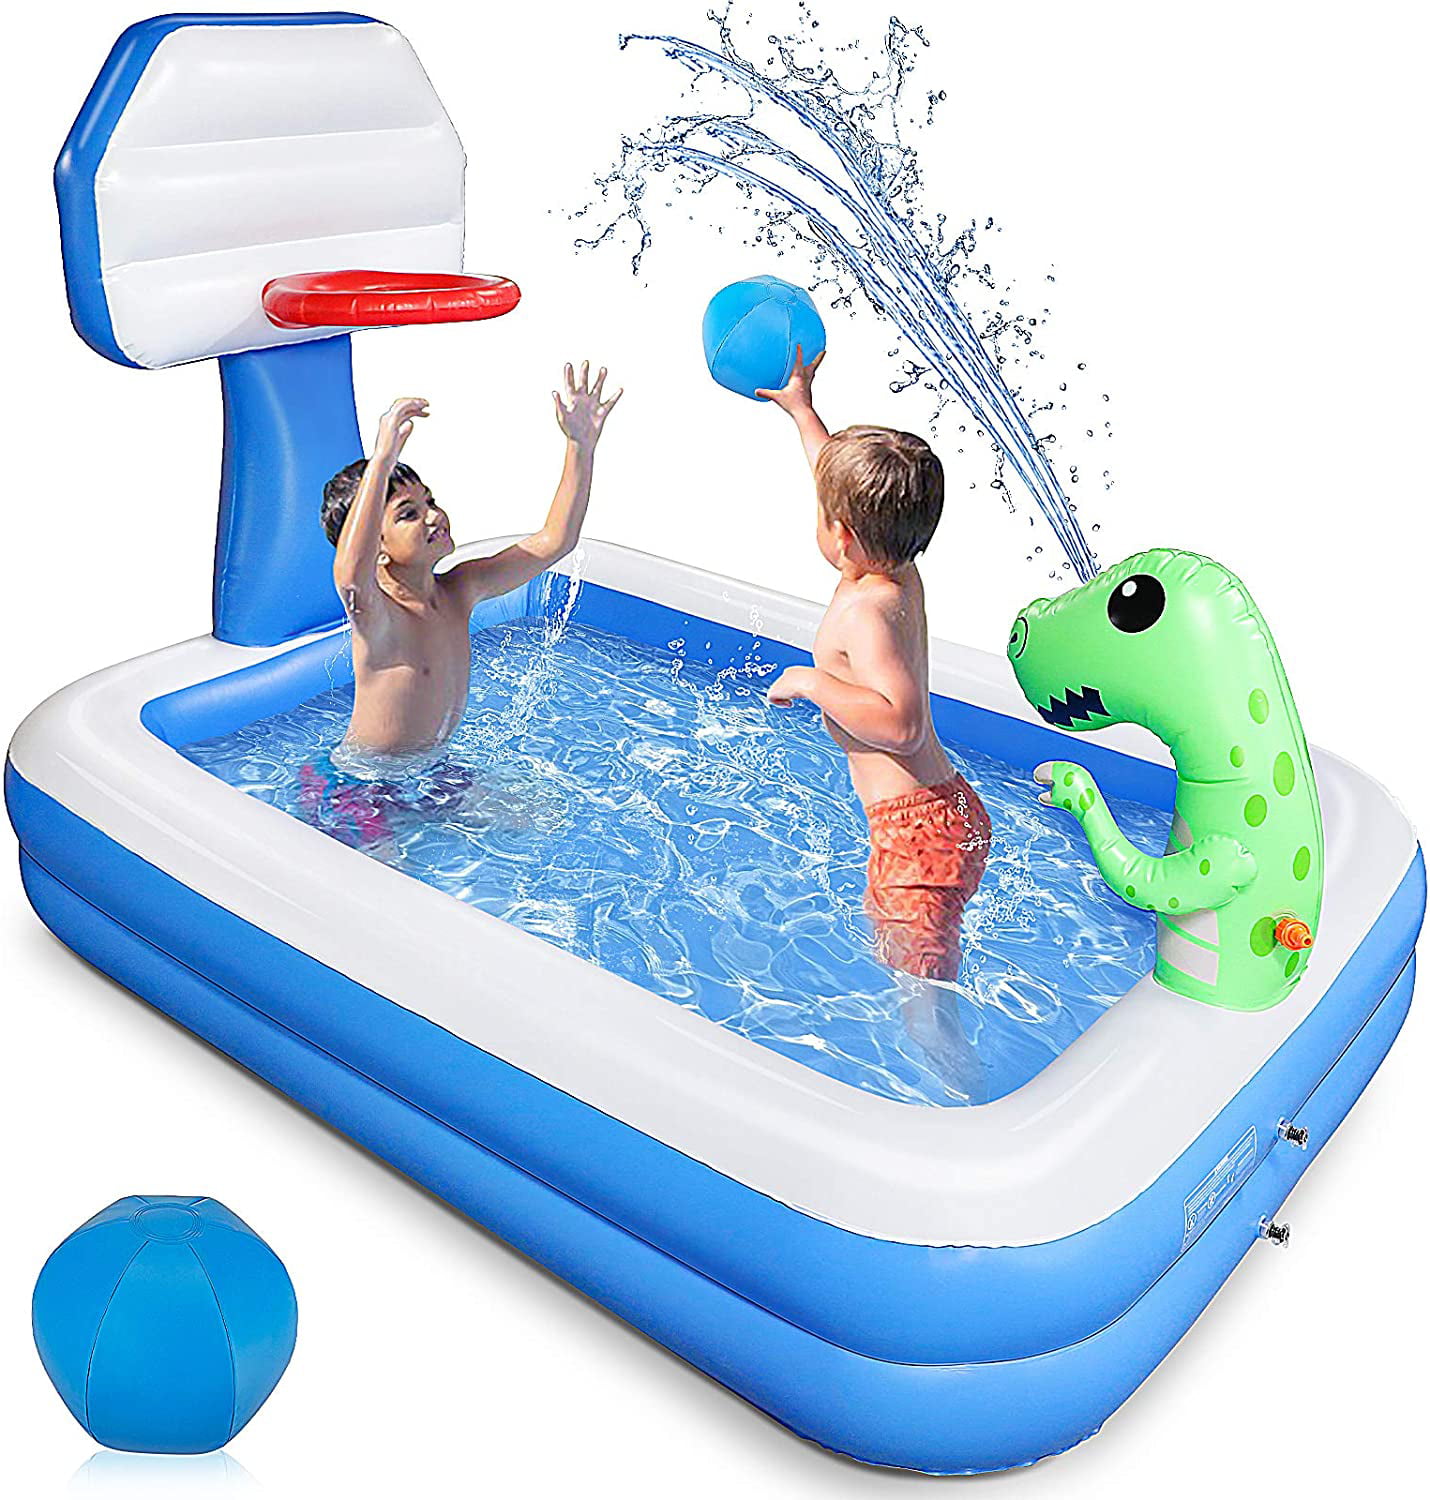 Ages 3 Yrs+ Kid Connection Inflatable Two-Ring Paddling Pool 